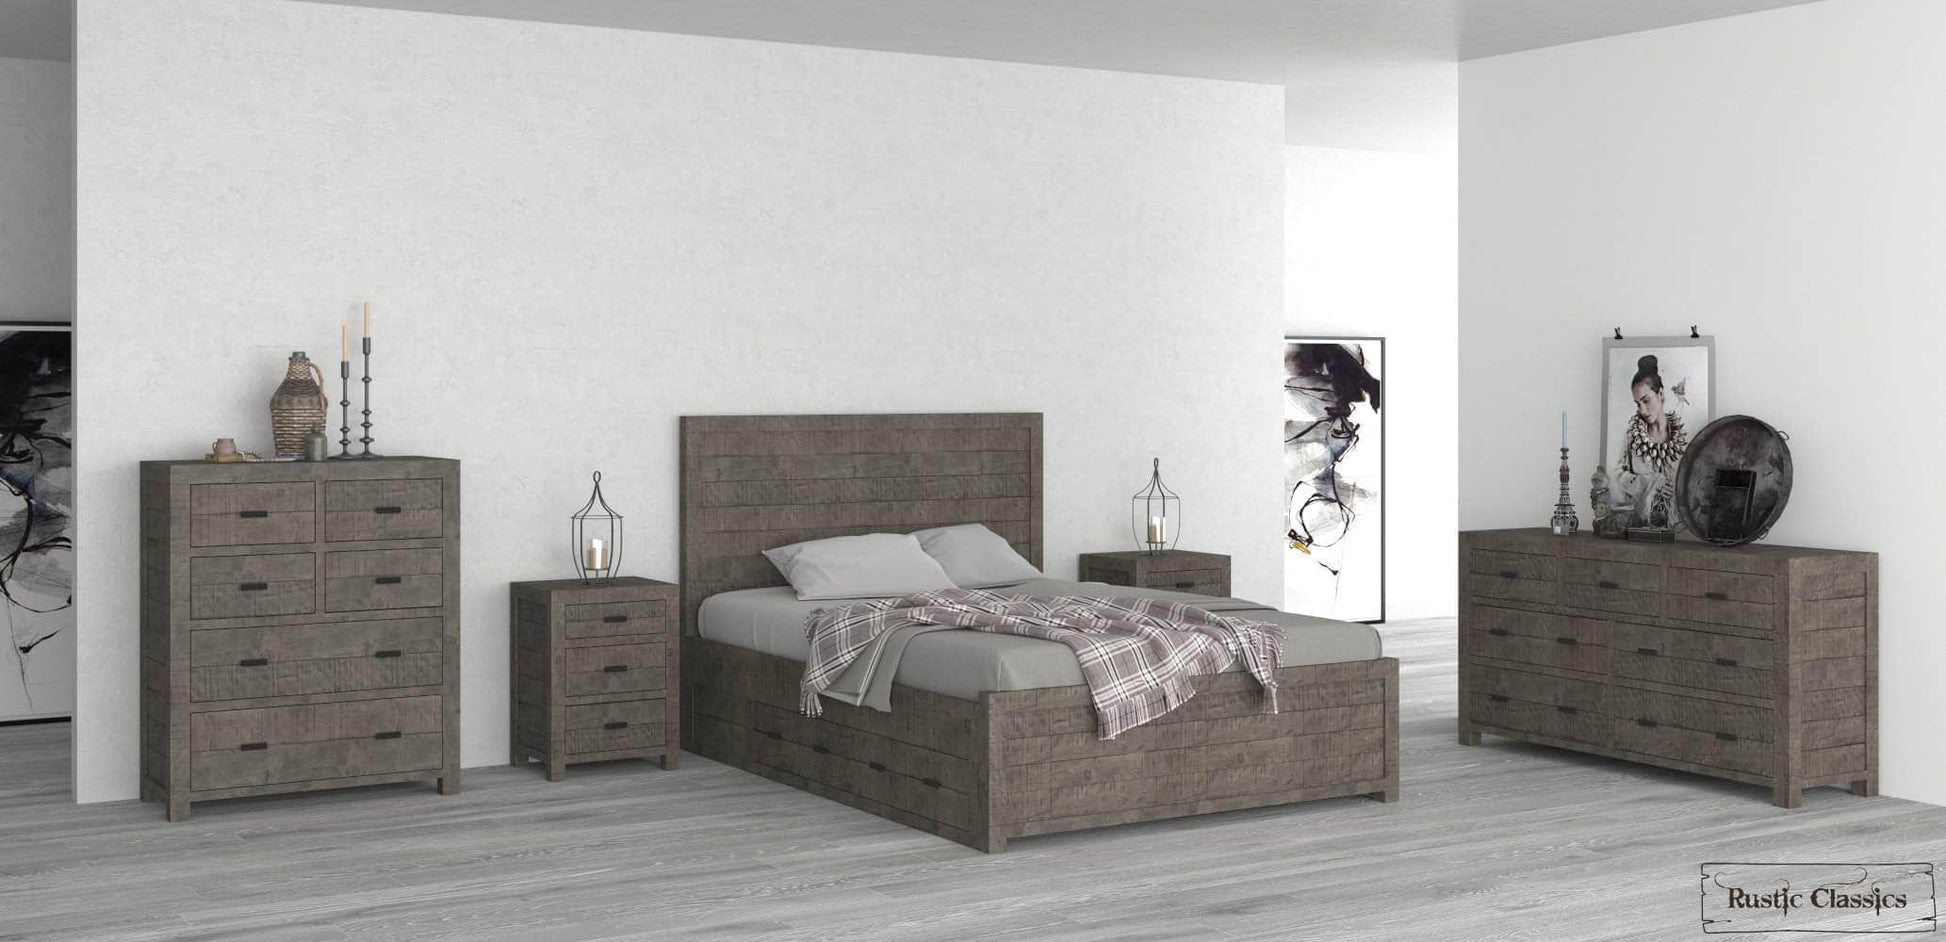 Rustic Classics Bedroom Set Whistler 5 Piece Reclaimed Wood Storage Platform Bedroom Furniture Set in Grey – Available in 2 Sizes